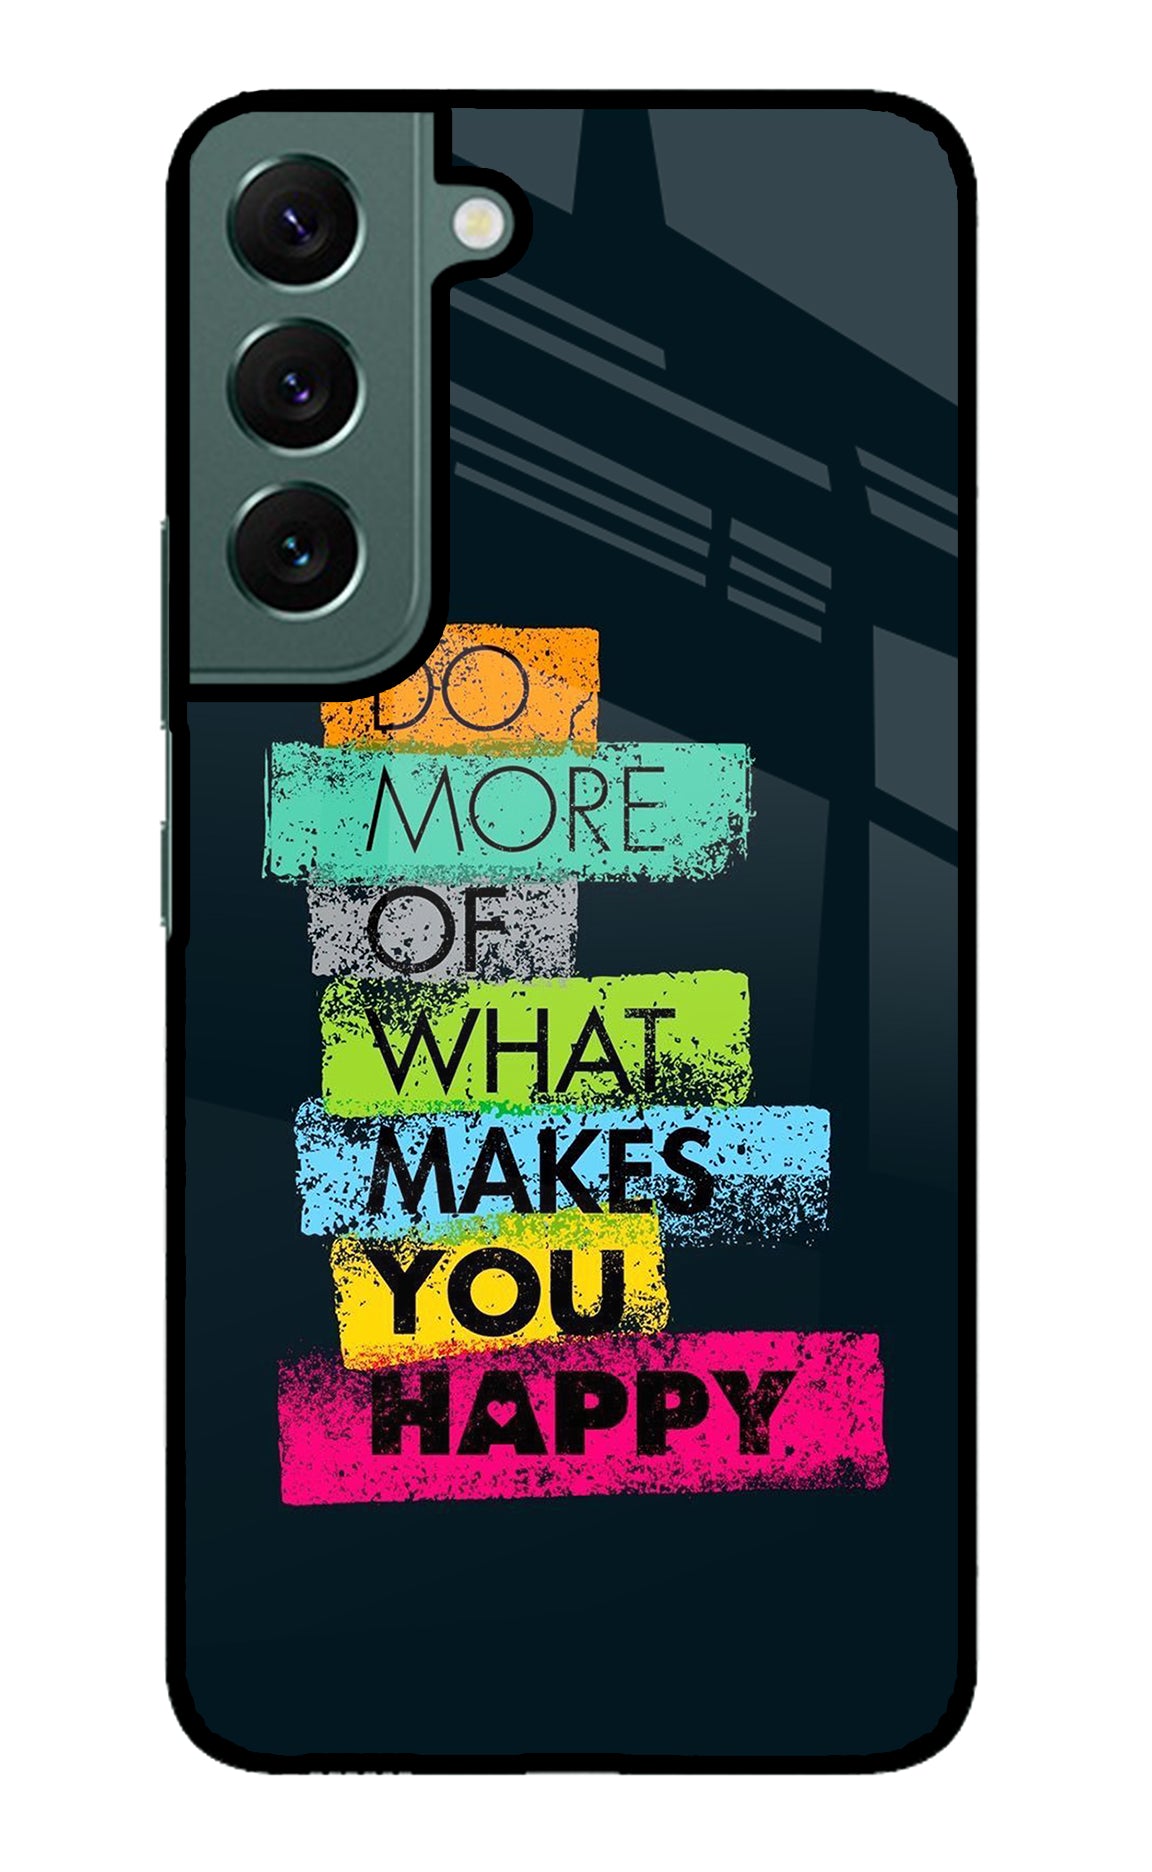 Do More Of What Makes You Happy Samsung S22 Plus Back Cover